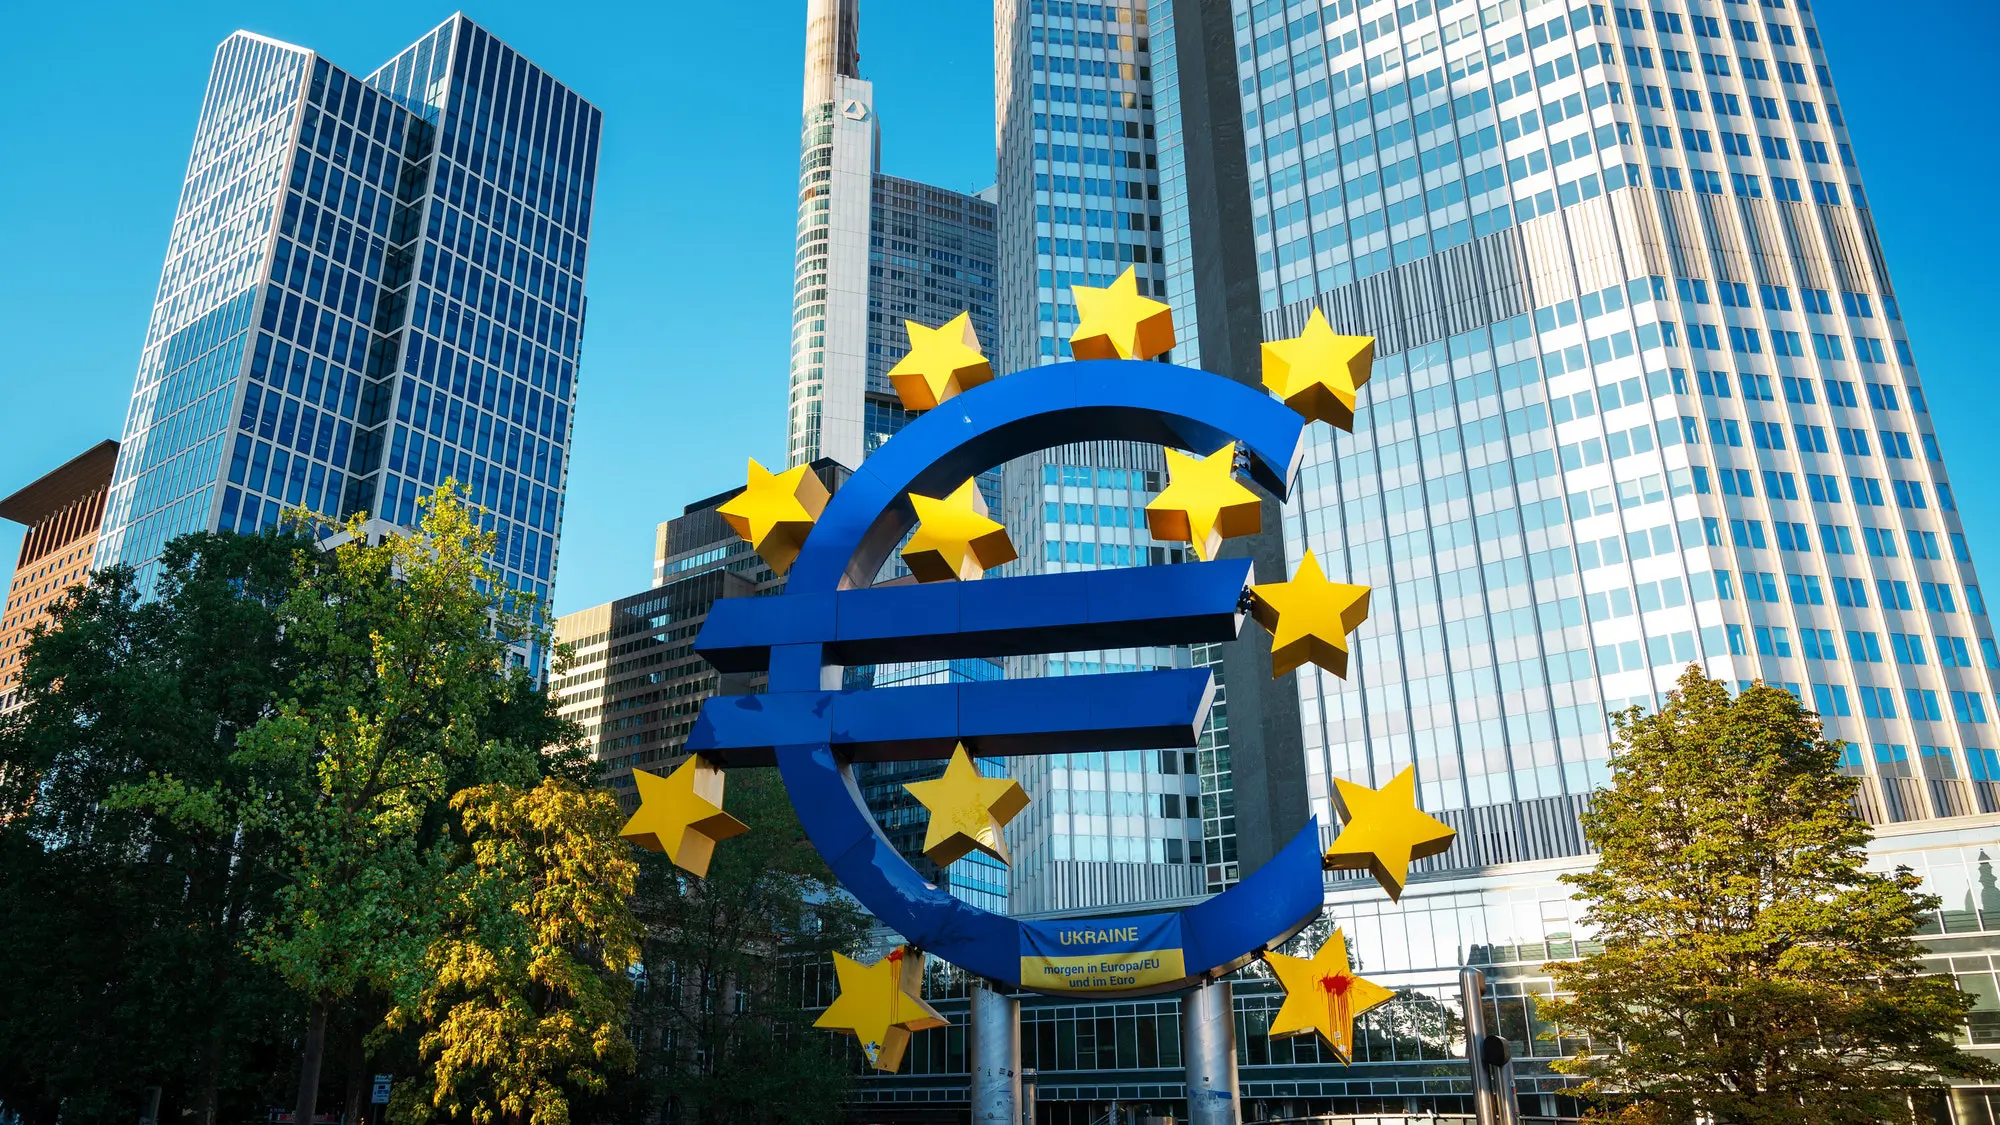 The photograph shows the iconic Euro symbol sculpture, adorned with stars, in front of the European Central Bank (ECB) headquarters, signifying discussions or developments regarding the digital euro.